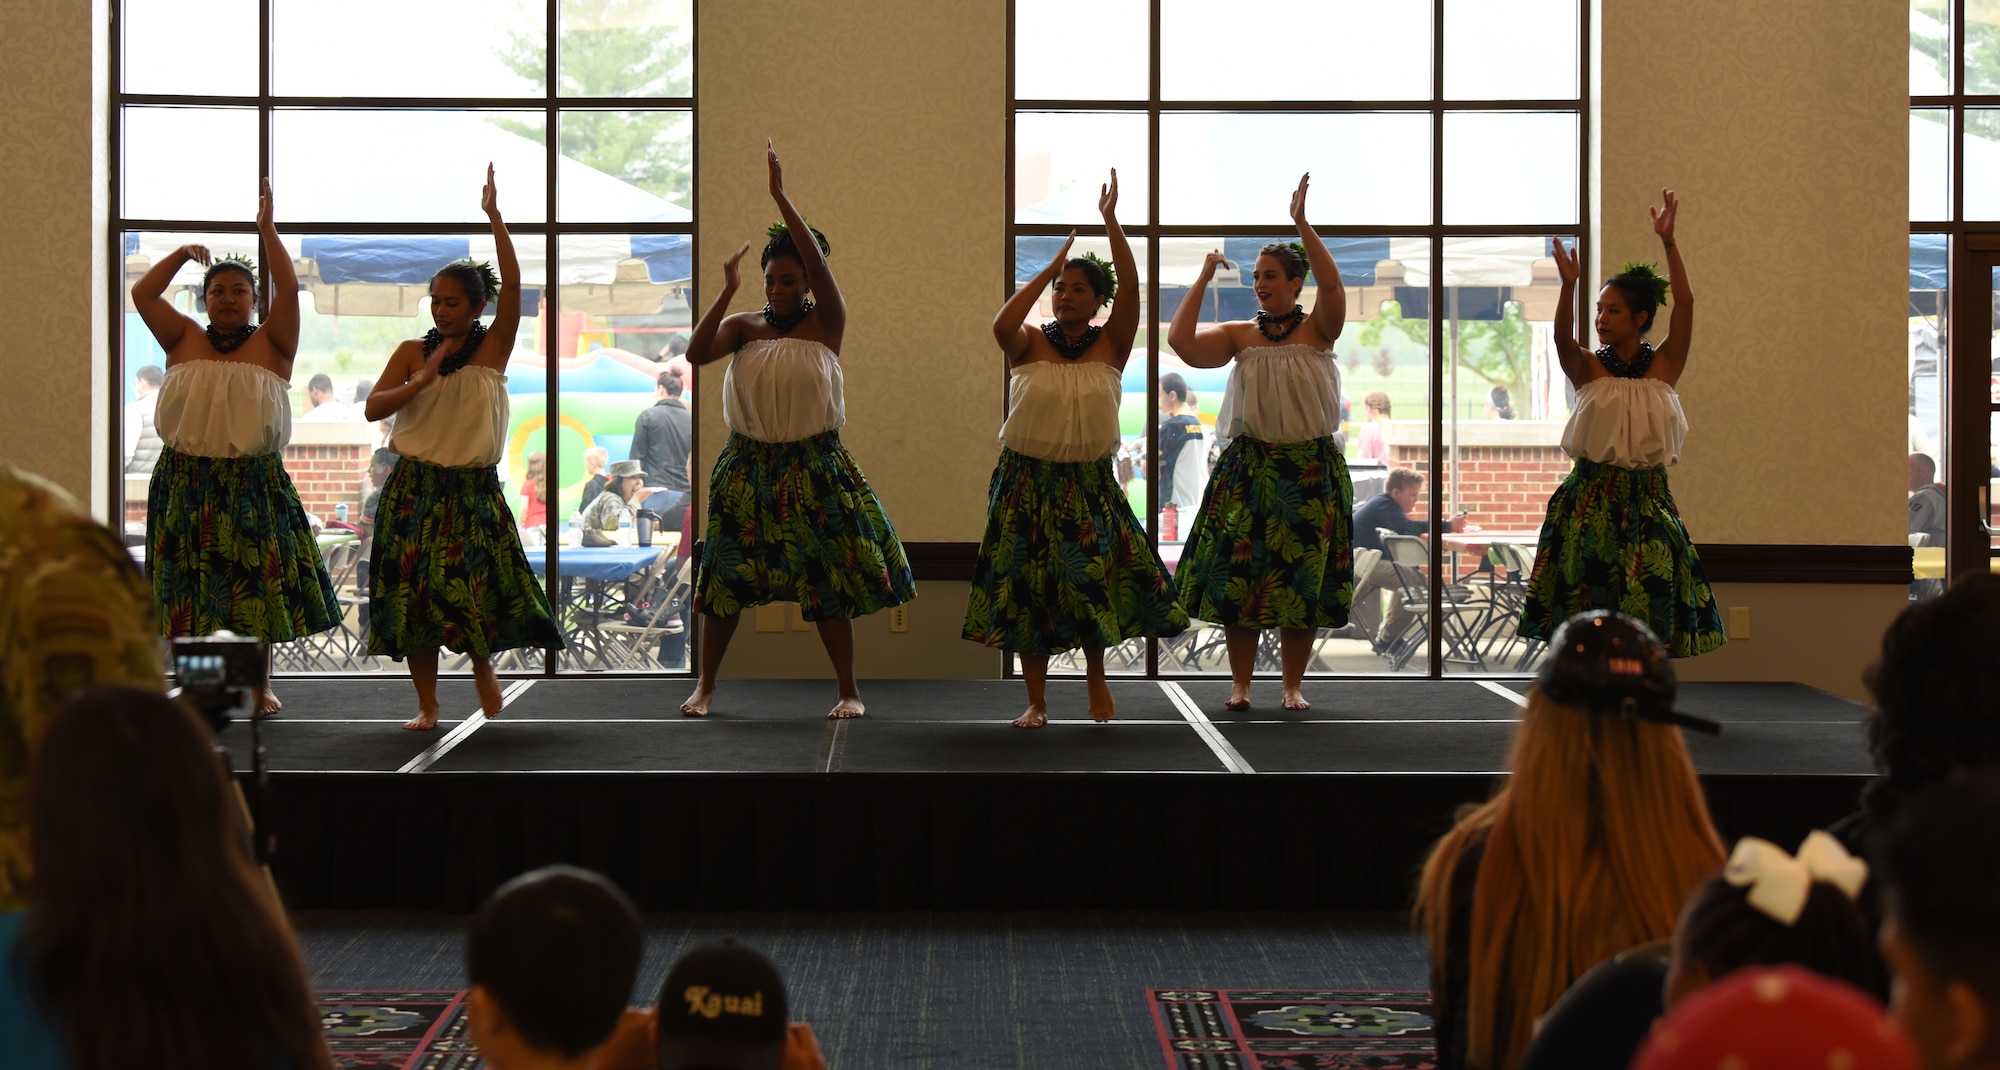 Members of the 808 Ohana of the Midwest dance group treat an audience to a hula performance on May 3, 2019 at Scott Air Force Base, Illinois. The performance was a part of the Scott AFB Wingman Day Diversity Festival. (U.S. Air Force photo by Airman 1st Class Solomon Cook)